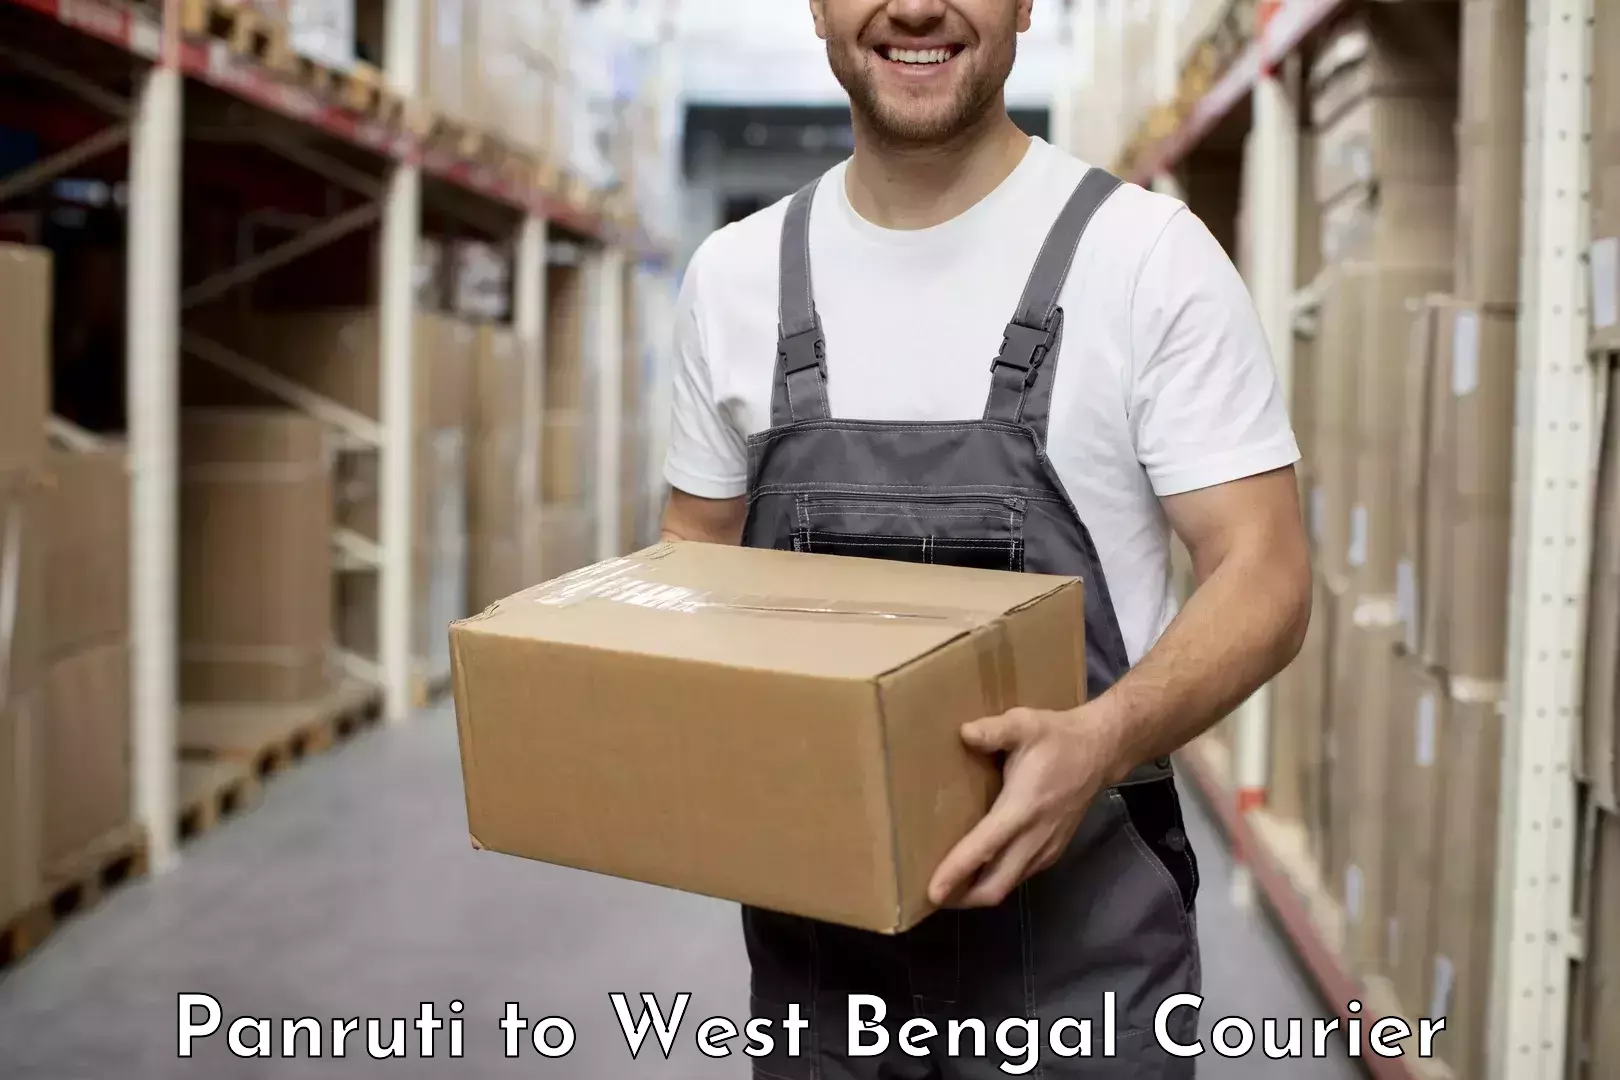 User-friendly courier app Panruti to West Bengal